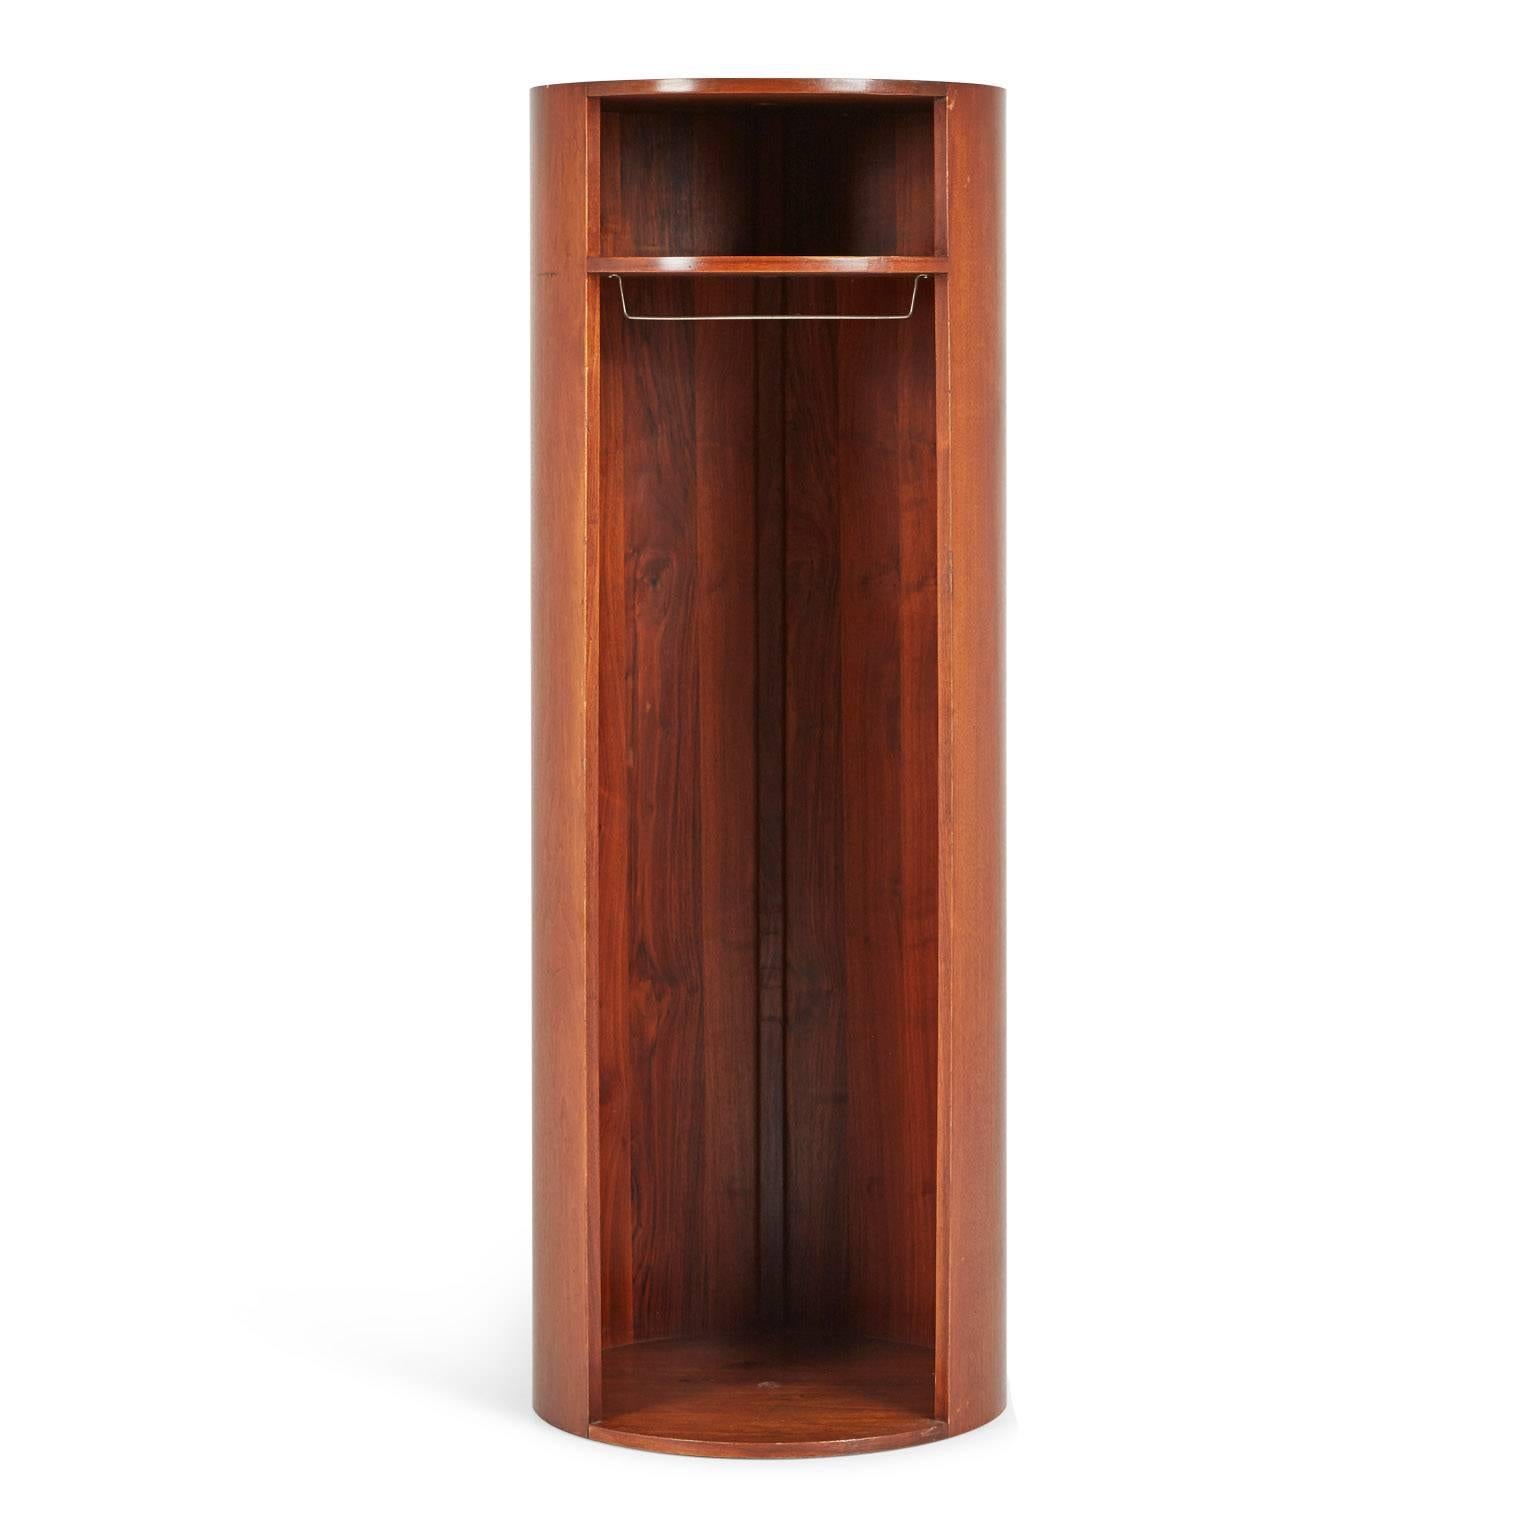 Innovative Danish modern cylindrical wardrobe manufactured by Lehigh Furniture Company. This functional and elegant piece is fabricated from solid walnut with a dark finish and the interior contains one shelf and a hanging rod. There are holes